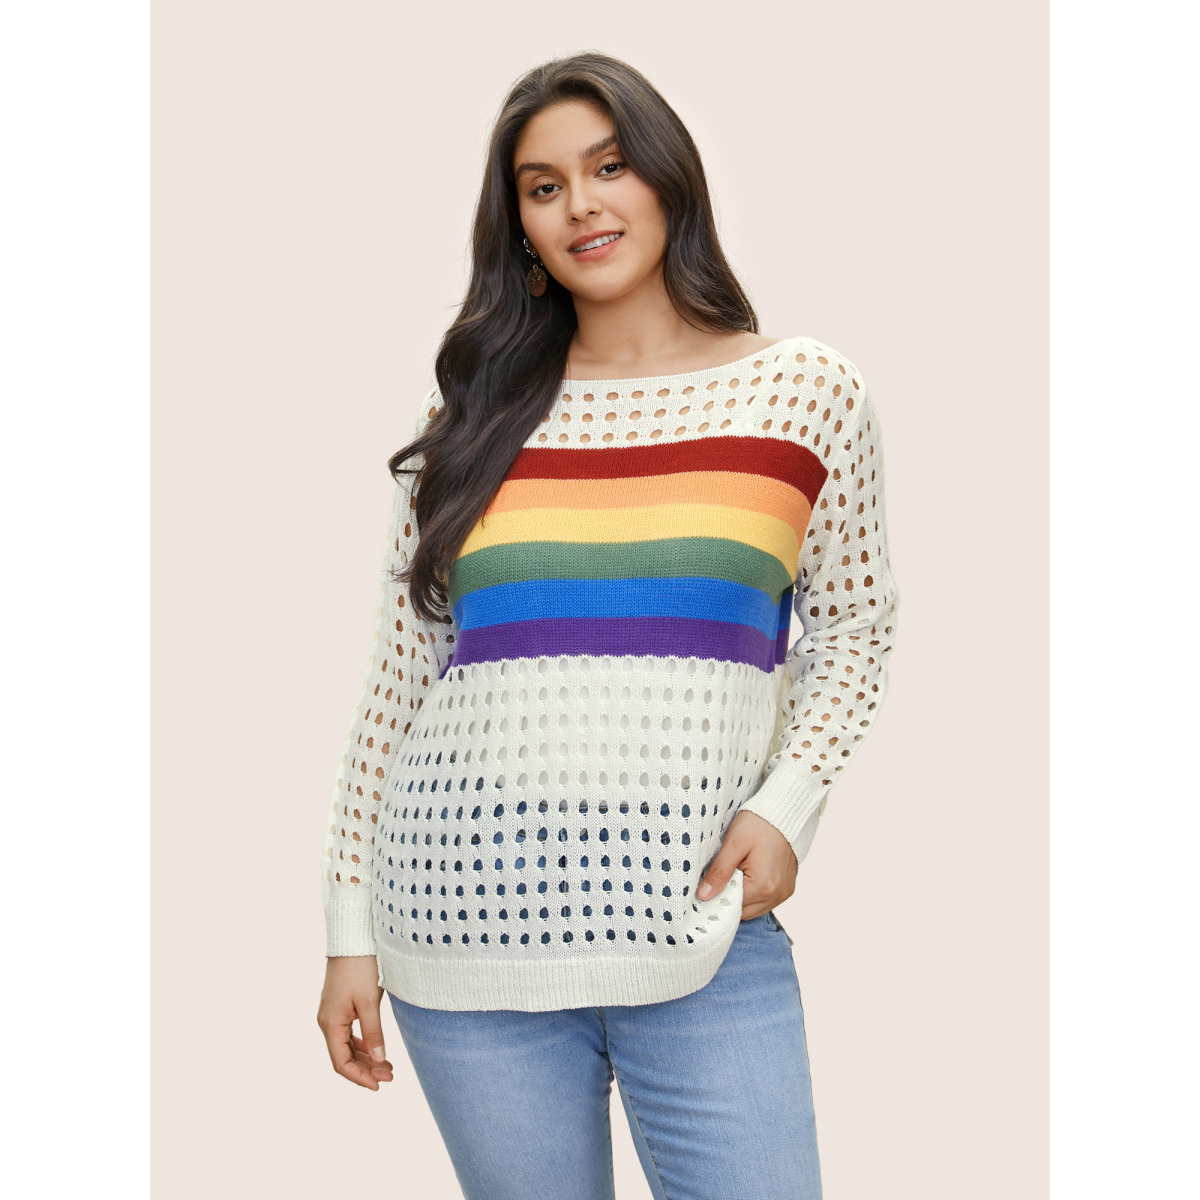 

Contrast Striped Boat Neck Cut Out Sweater T-shirt Plus Size White Women Contrast Rainbow Boat Neck Long Sleeve  Bloomchic